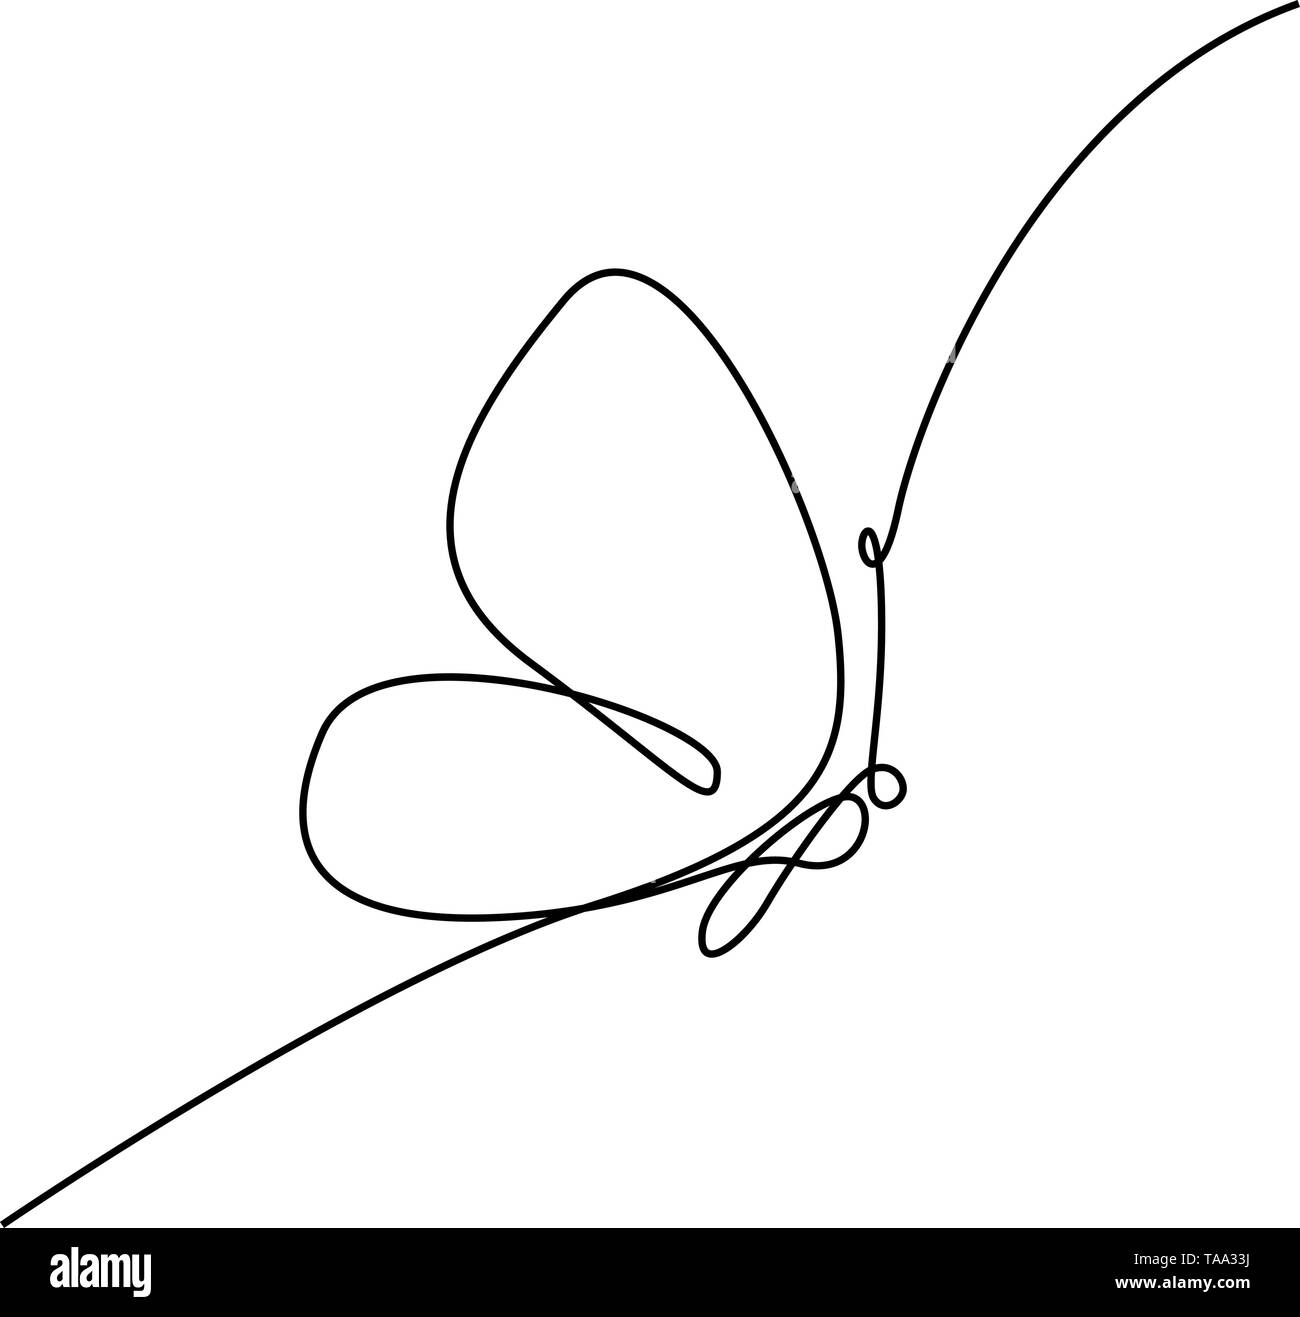 3 Butterflies in One Line Art Style Graphic by subujayd · Creative Fabrica